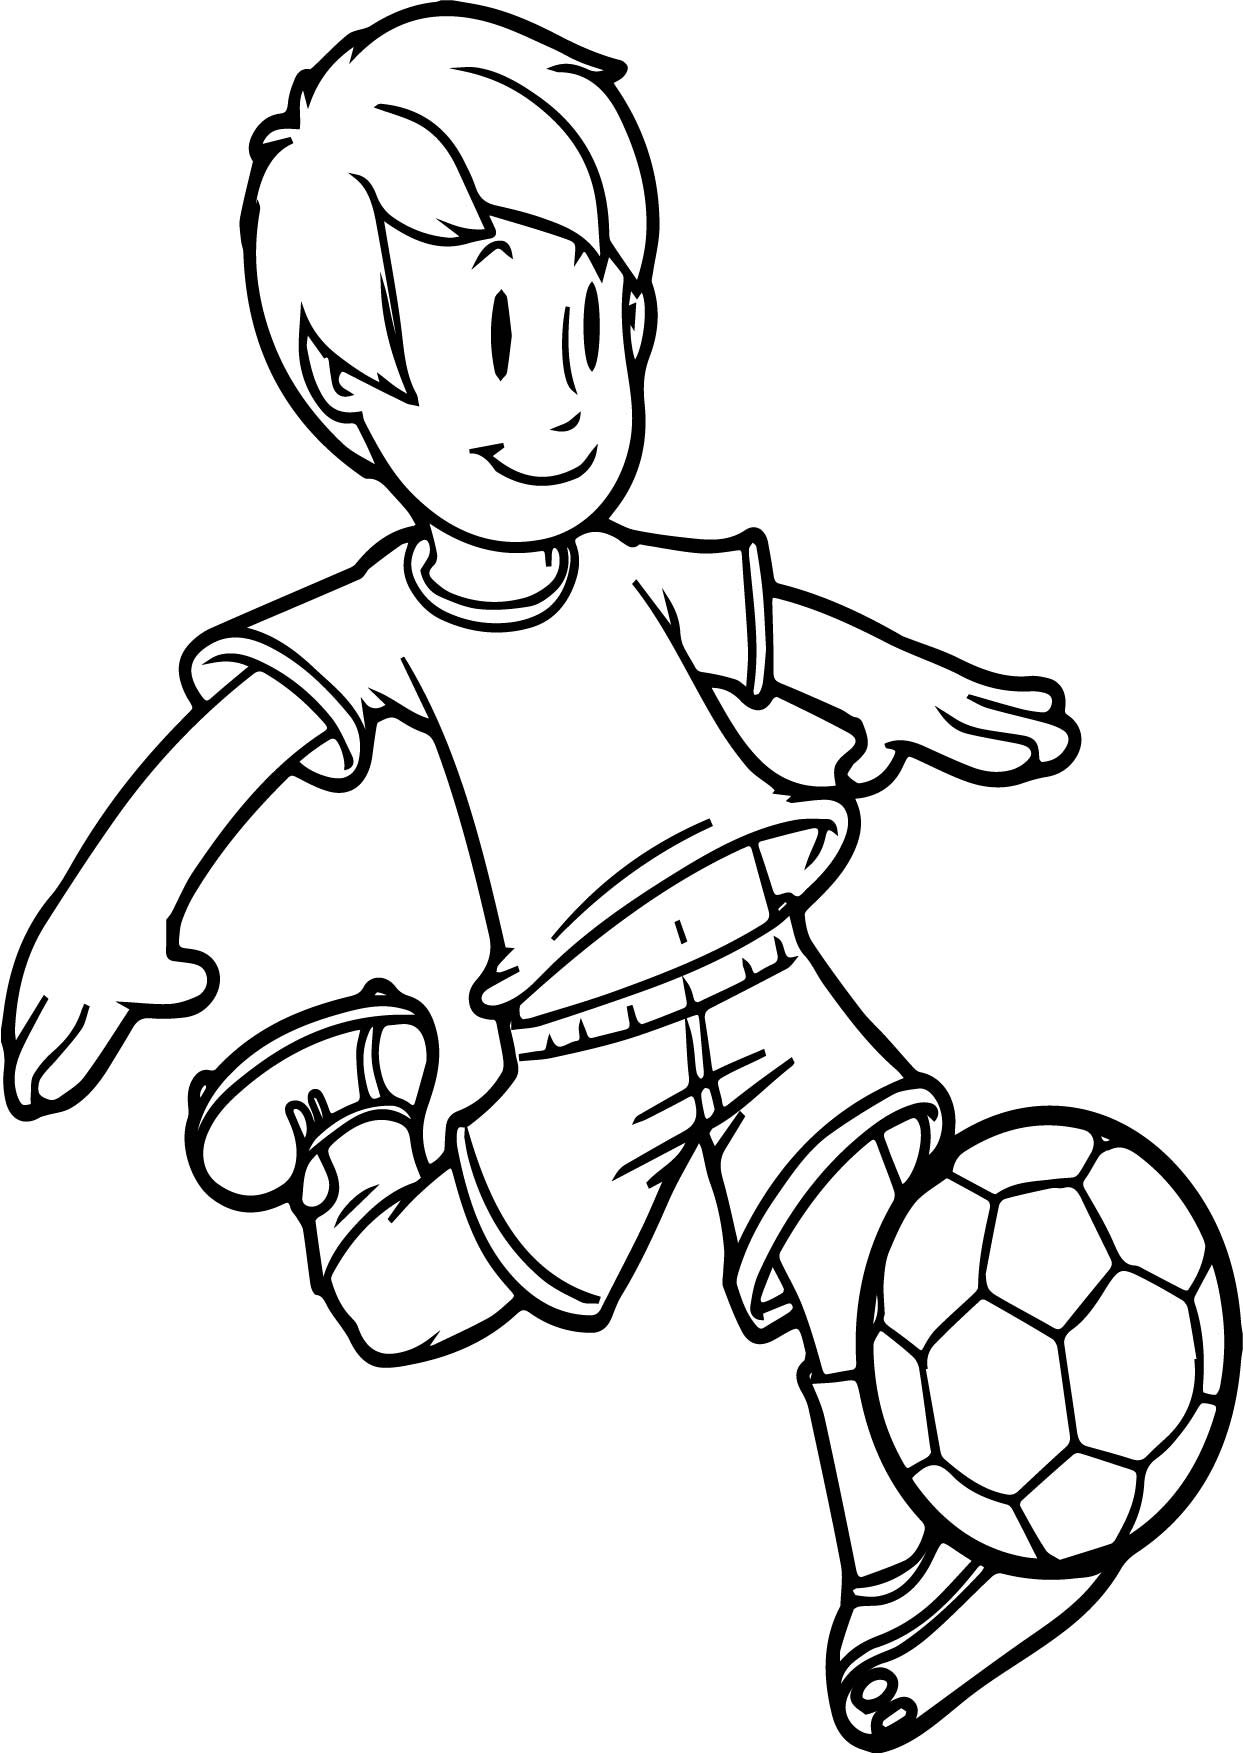 Cartoon Boy Coloring Pages at GetColorings.com | Free printable ...